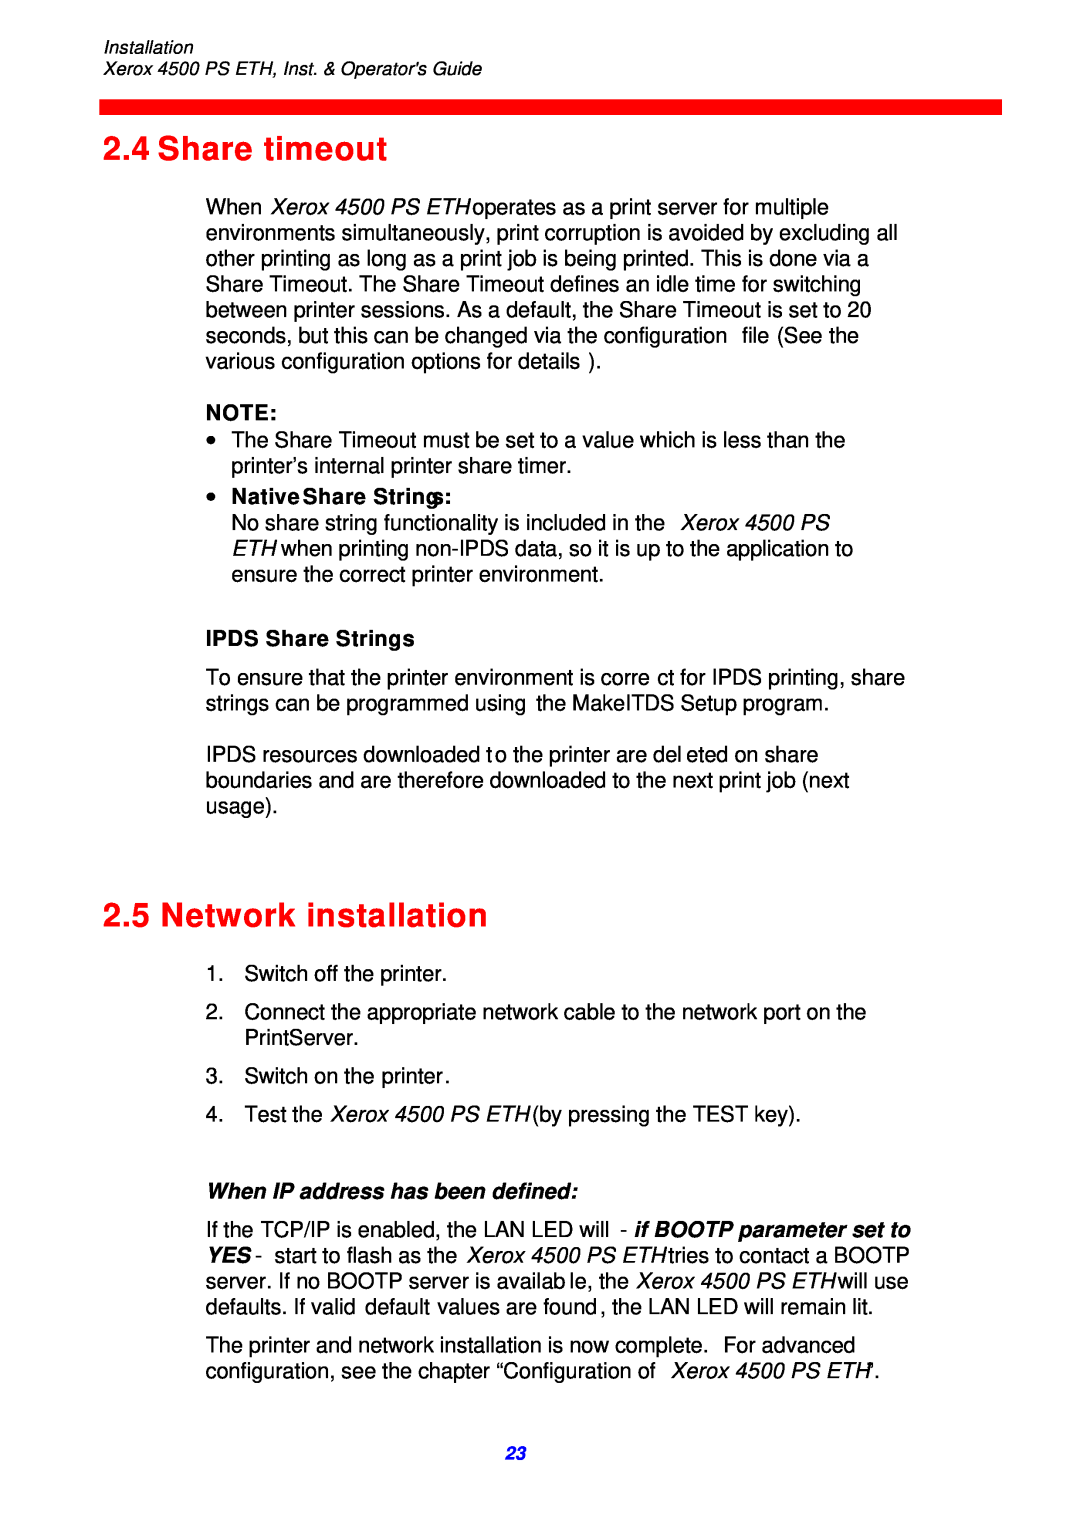 Xerox 4500 ps eth instruction manual Share timeout, Network installation, ∙ Native Share Strings, IPDS Share Strings 